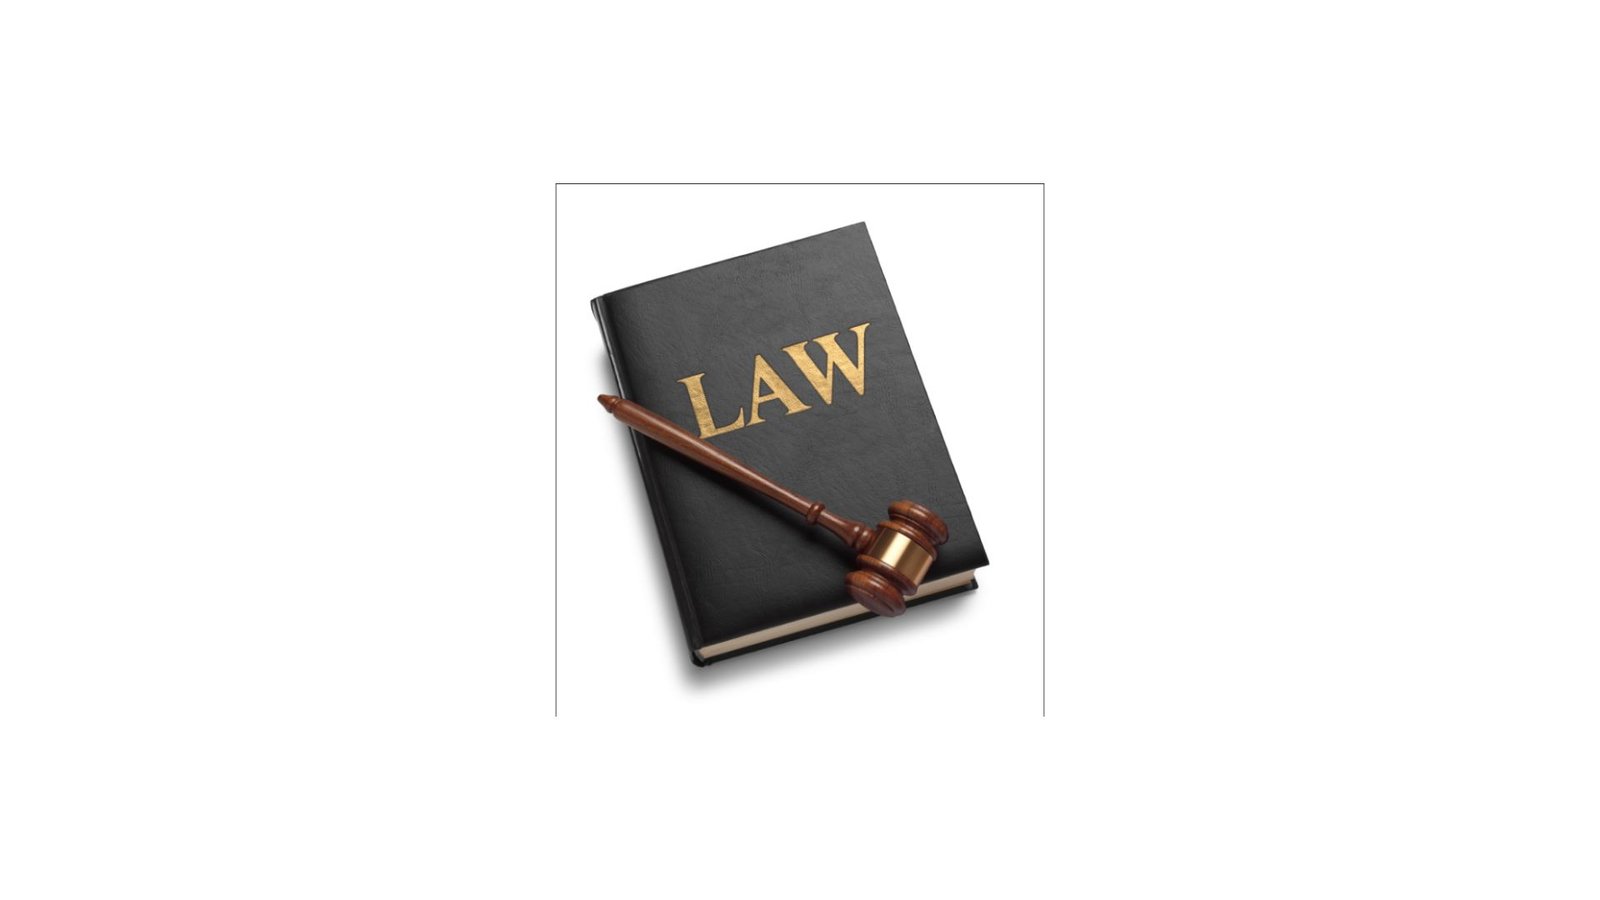 Image depicting a gavel and law book